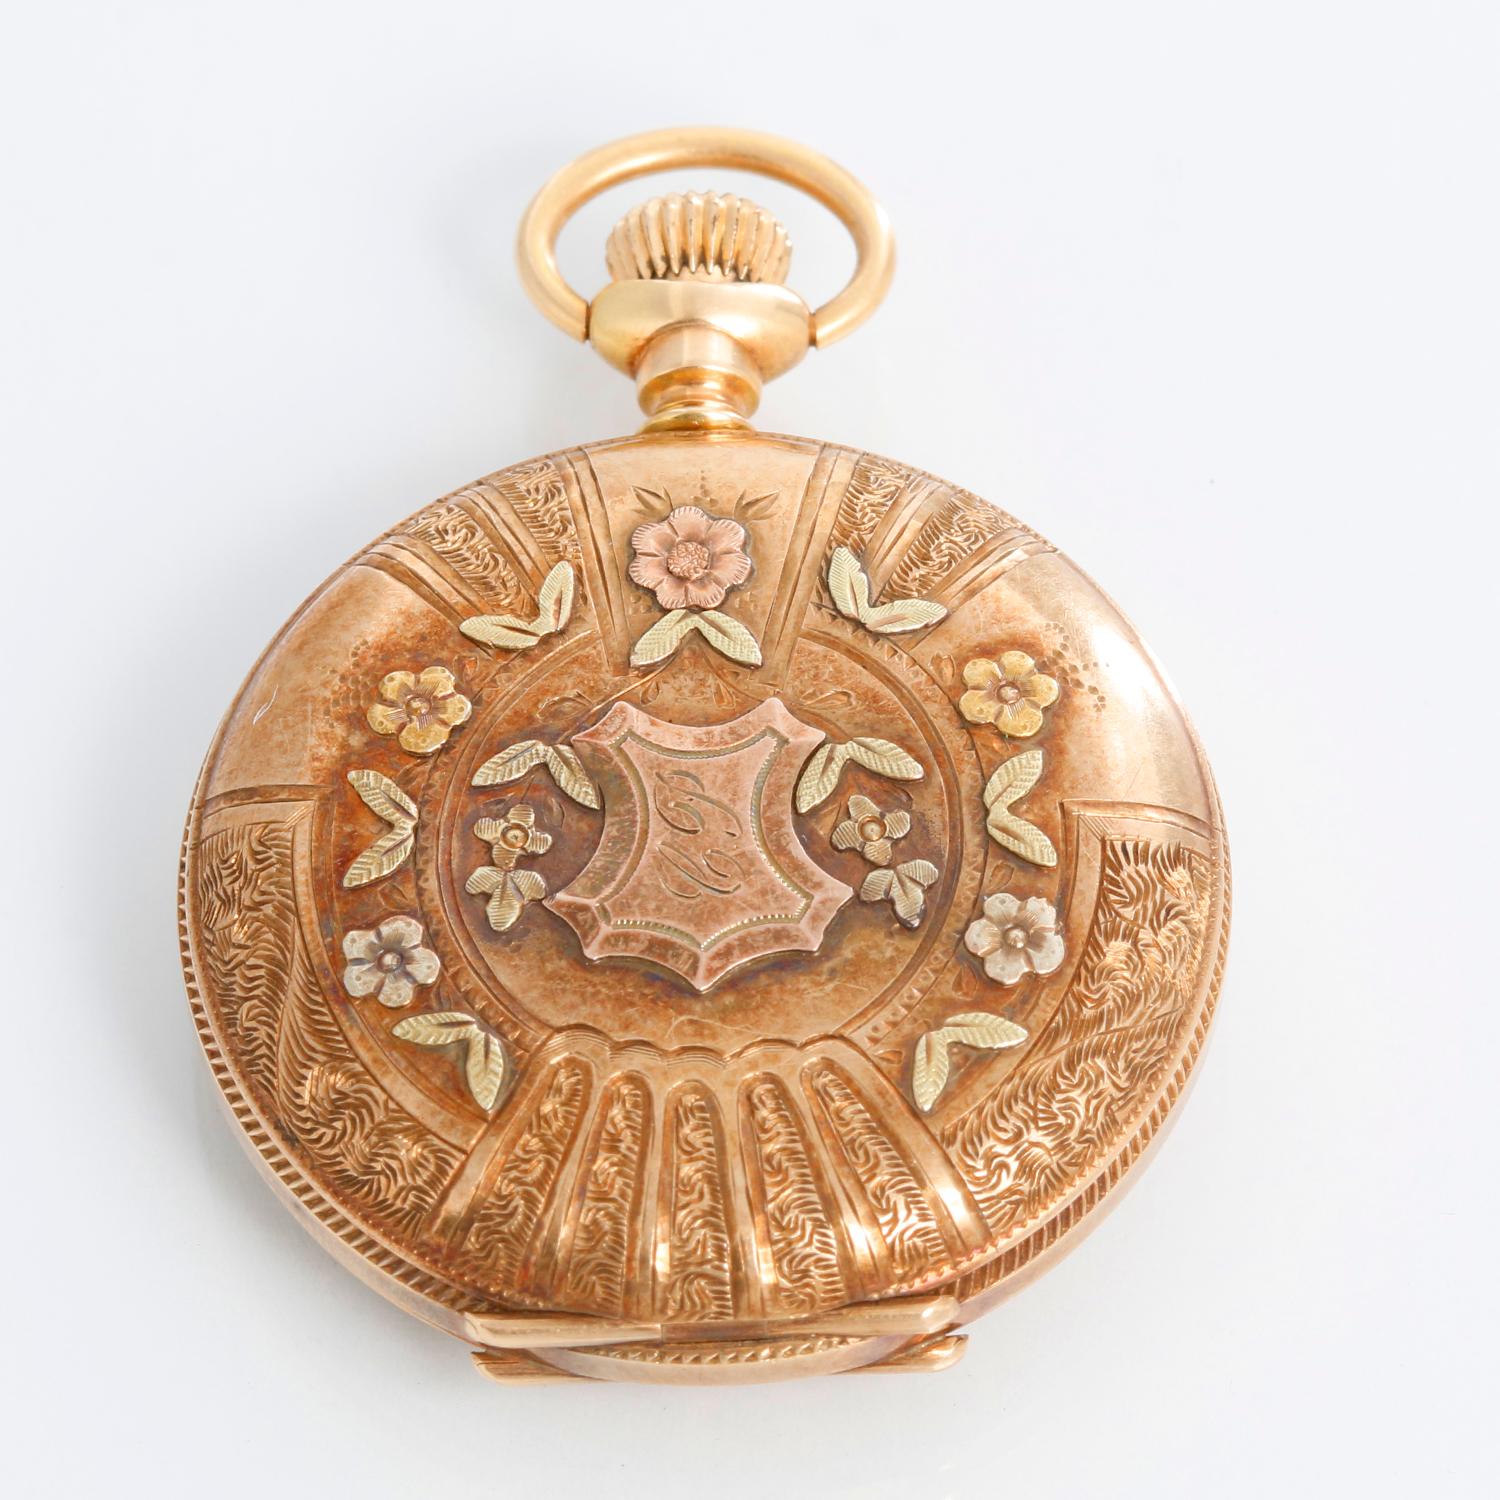 Waltham 14K Tri Gold Ladies Pendant Pocket Watch - Manual winding. 14K Yellow Gold, Rose Gold and Green Gold ornate case (34 mm ). White dial with Roman numerals. Pre-owned with custom box.
Will be serviced upon purchase. Delivery time will vary.